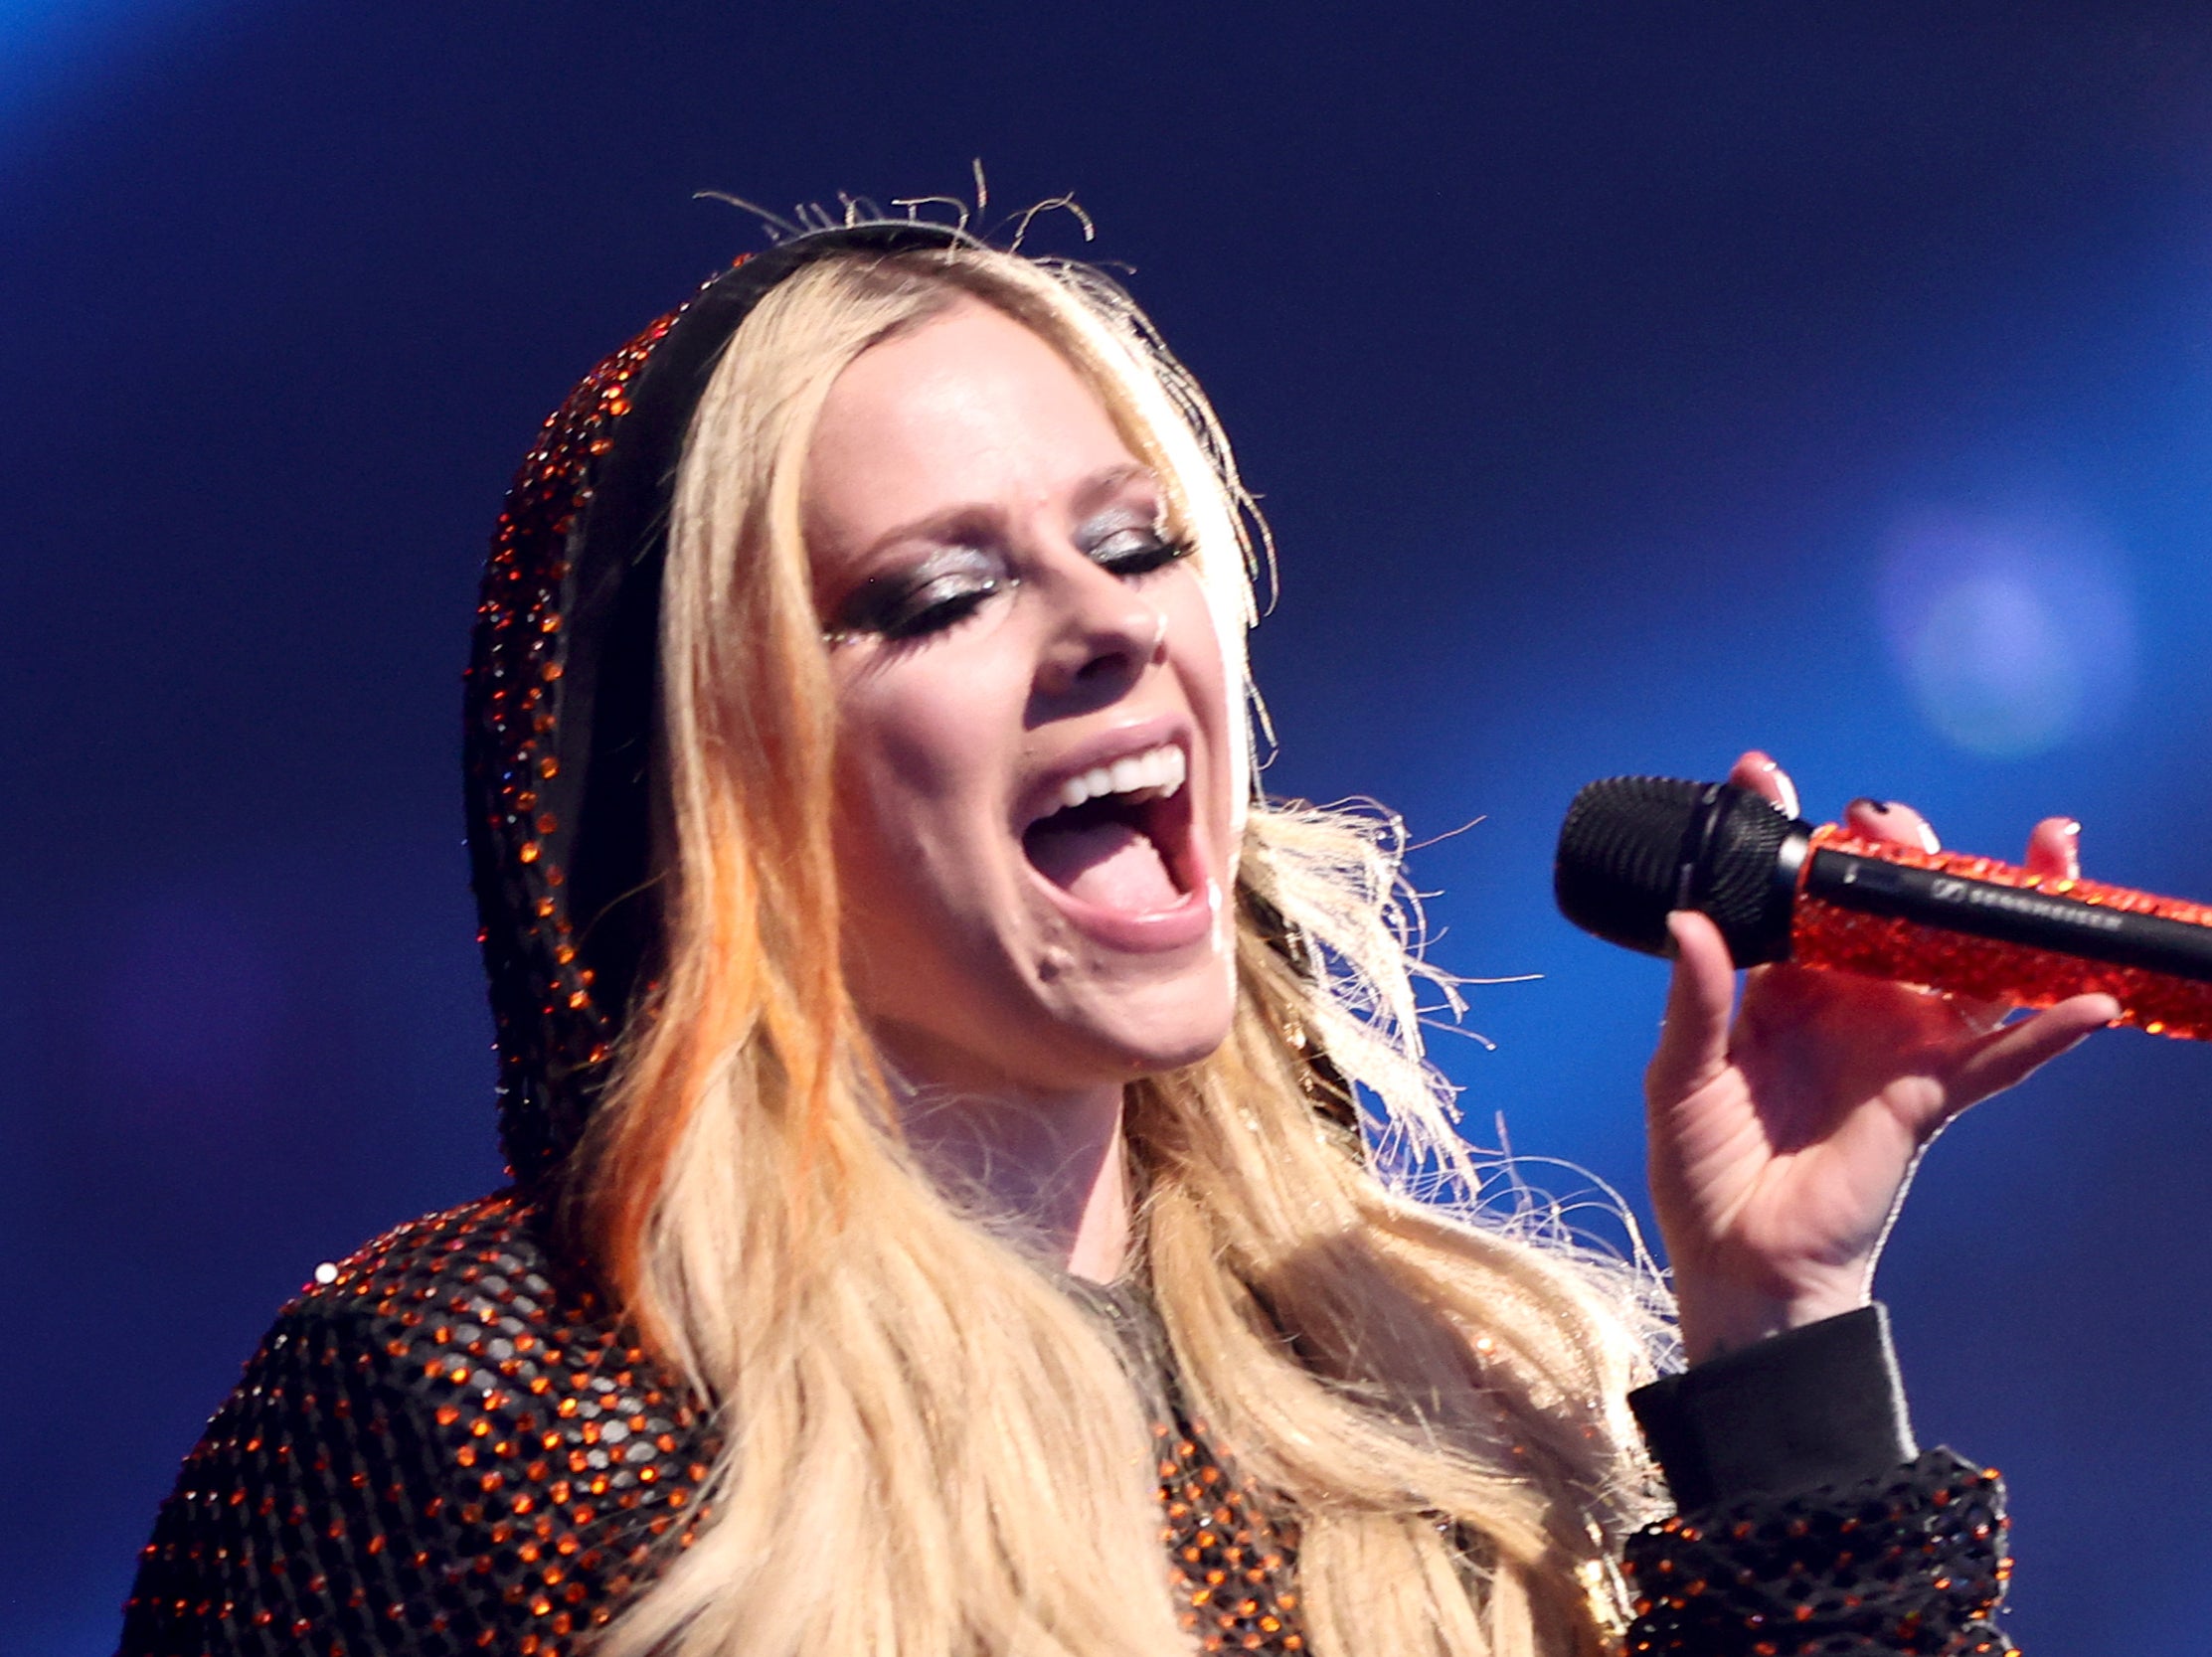 Avril Lavigne is playing the Other Stage